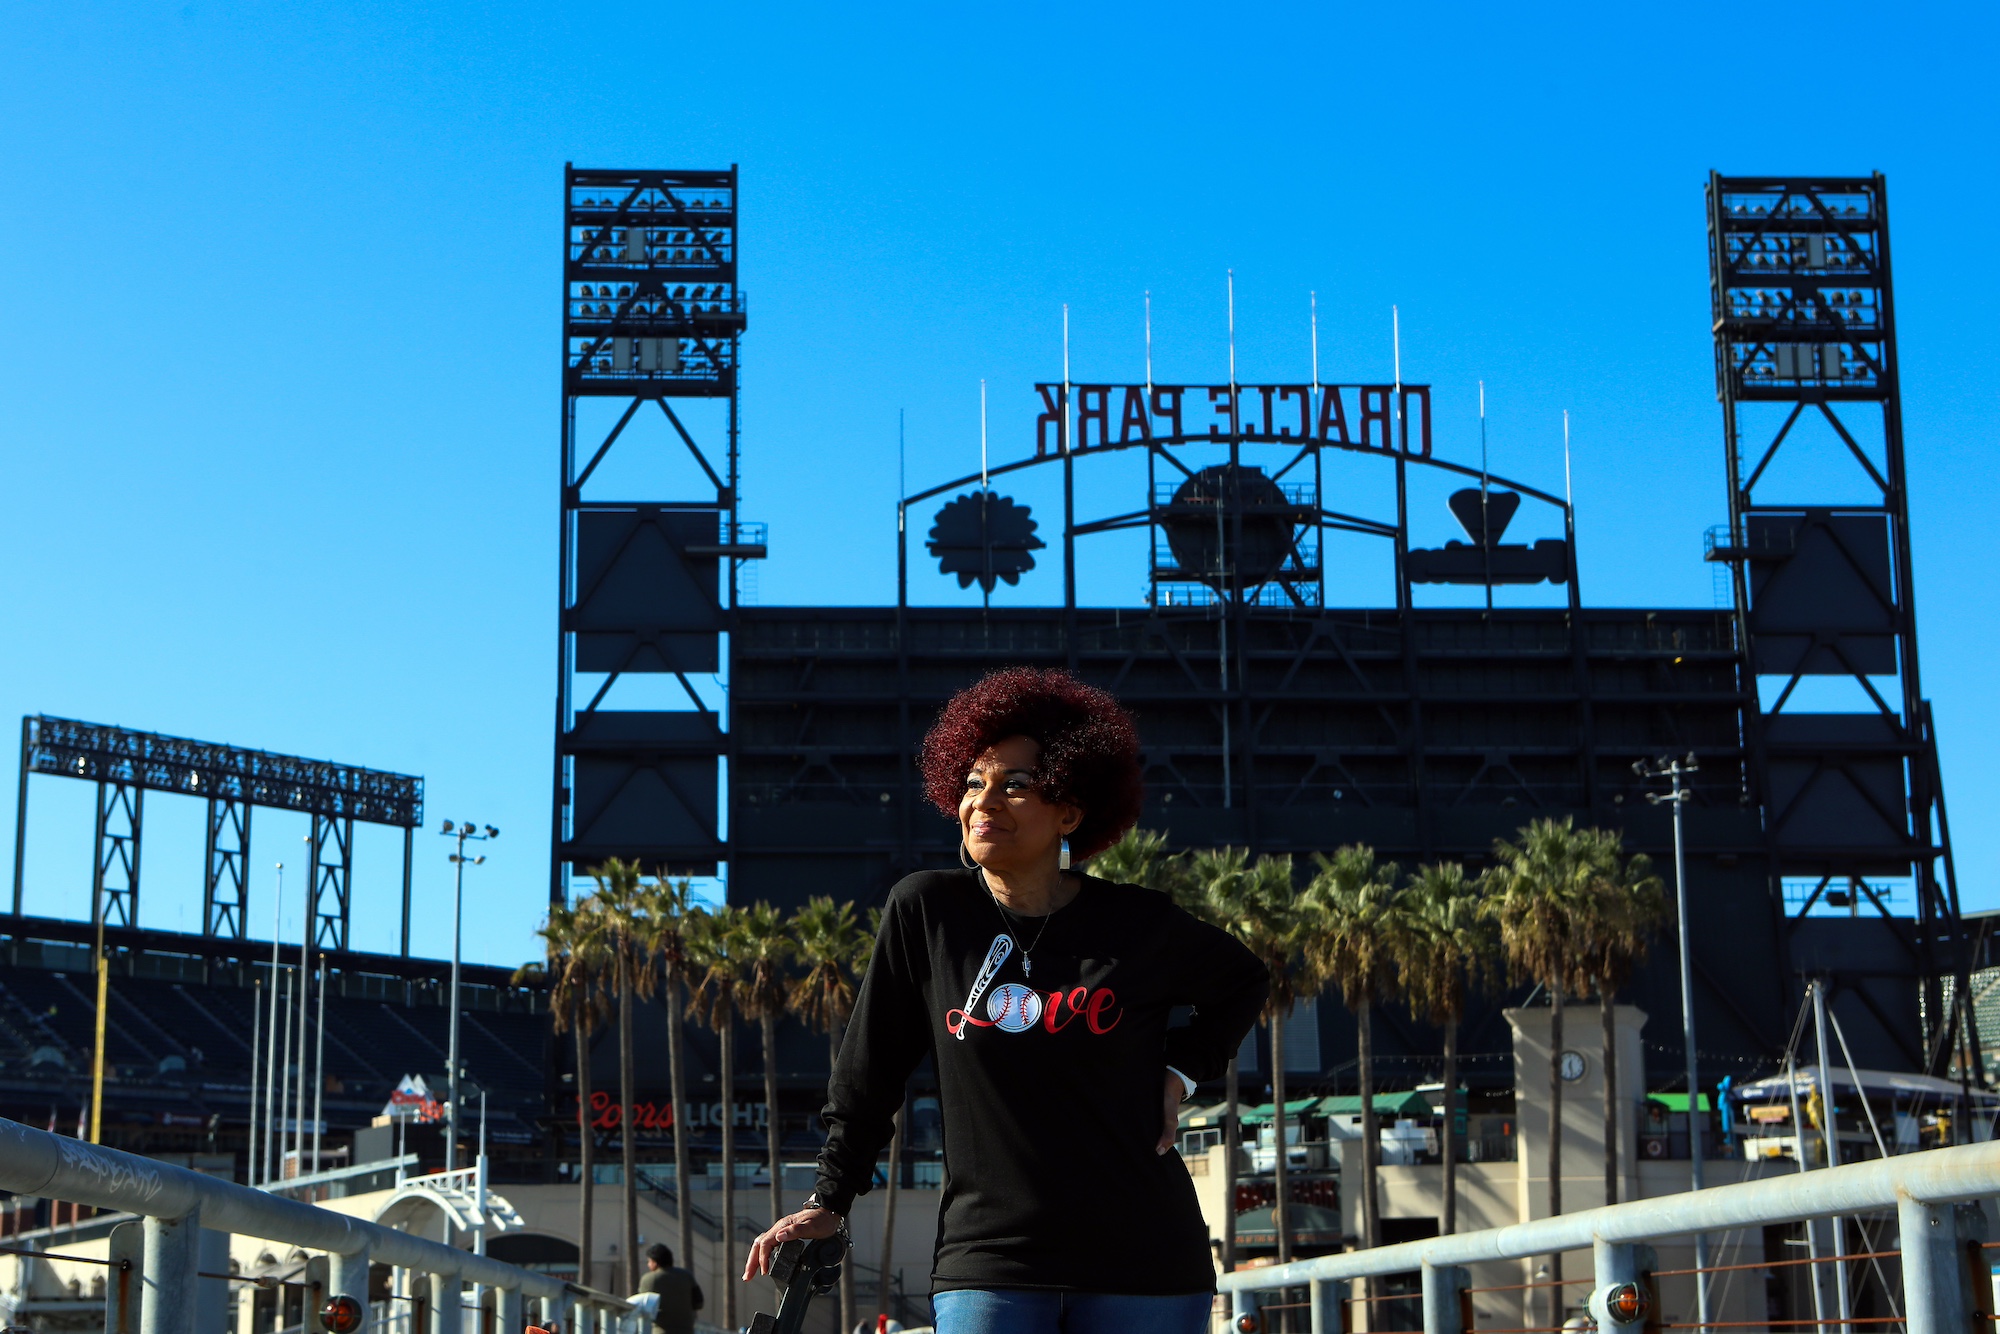 SAN FRANCISCO, CA - NOV. 20: Renel Brooks-Moon, the San Francisco Giants' PA announcer since 2000, poses for a portrait at Oracle Park on Friday, November 20, 2020, in San Francisco, Calif. Brooks-Moon, 62, was born in Oakland and is a Mills College graduate. Brooks-Moon has been using her longevity and voice to call out inequities in the hiring practices of the Giants and in Major League Baseball in general. They're listening. (Yalonda M. James/The San Francisco Chronicle via Getty Images)